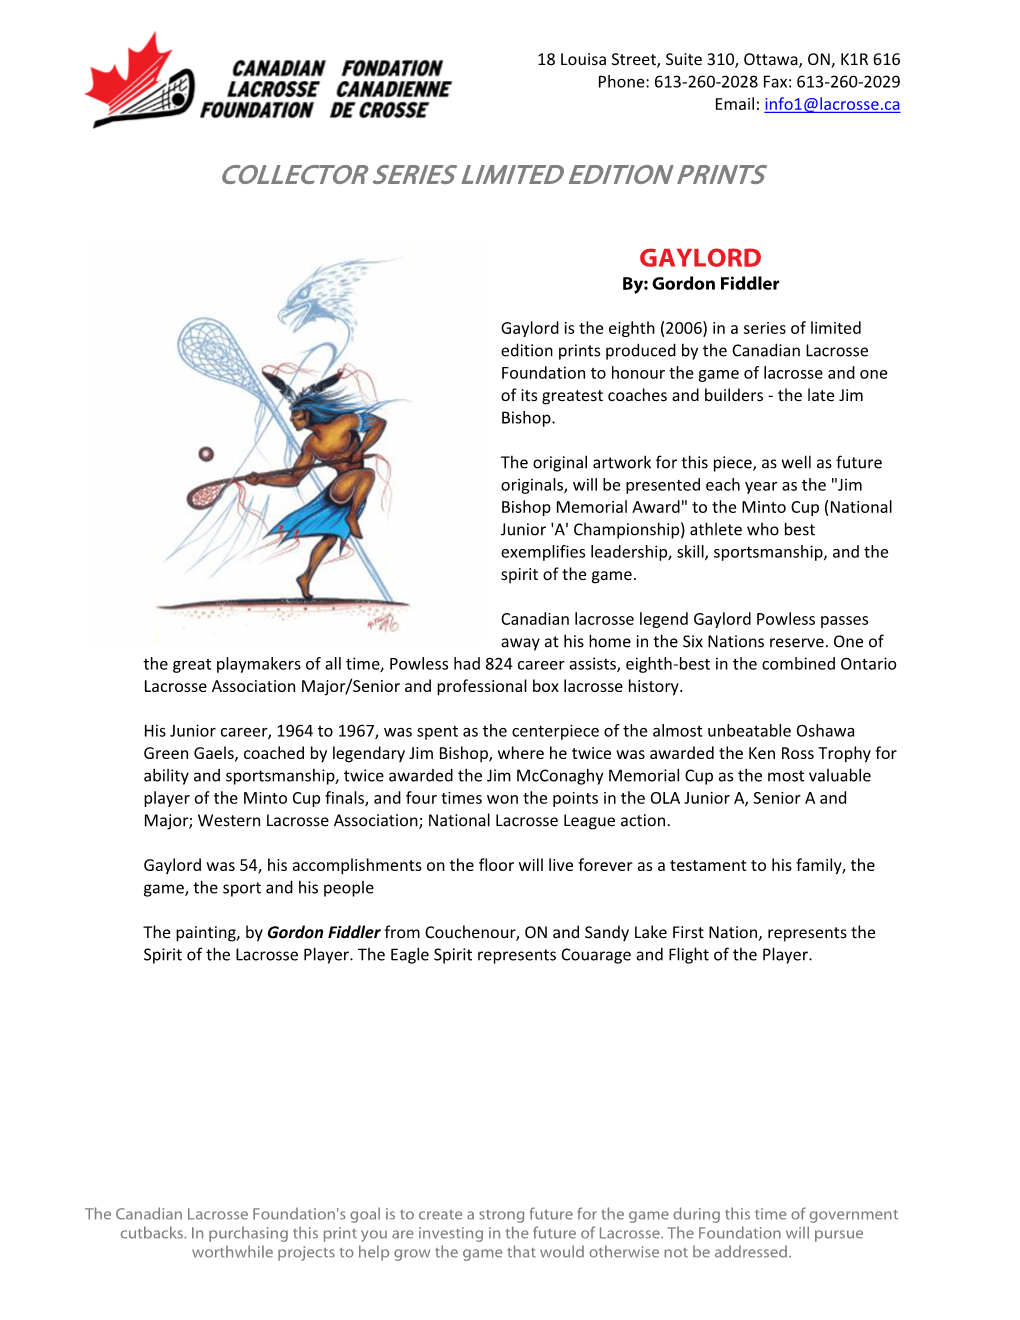 Collector Series Limited Edition Prints